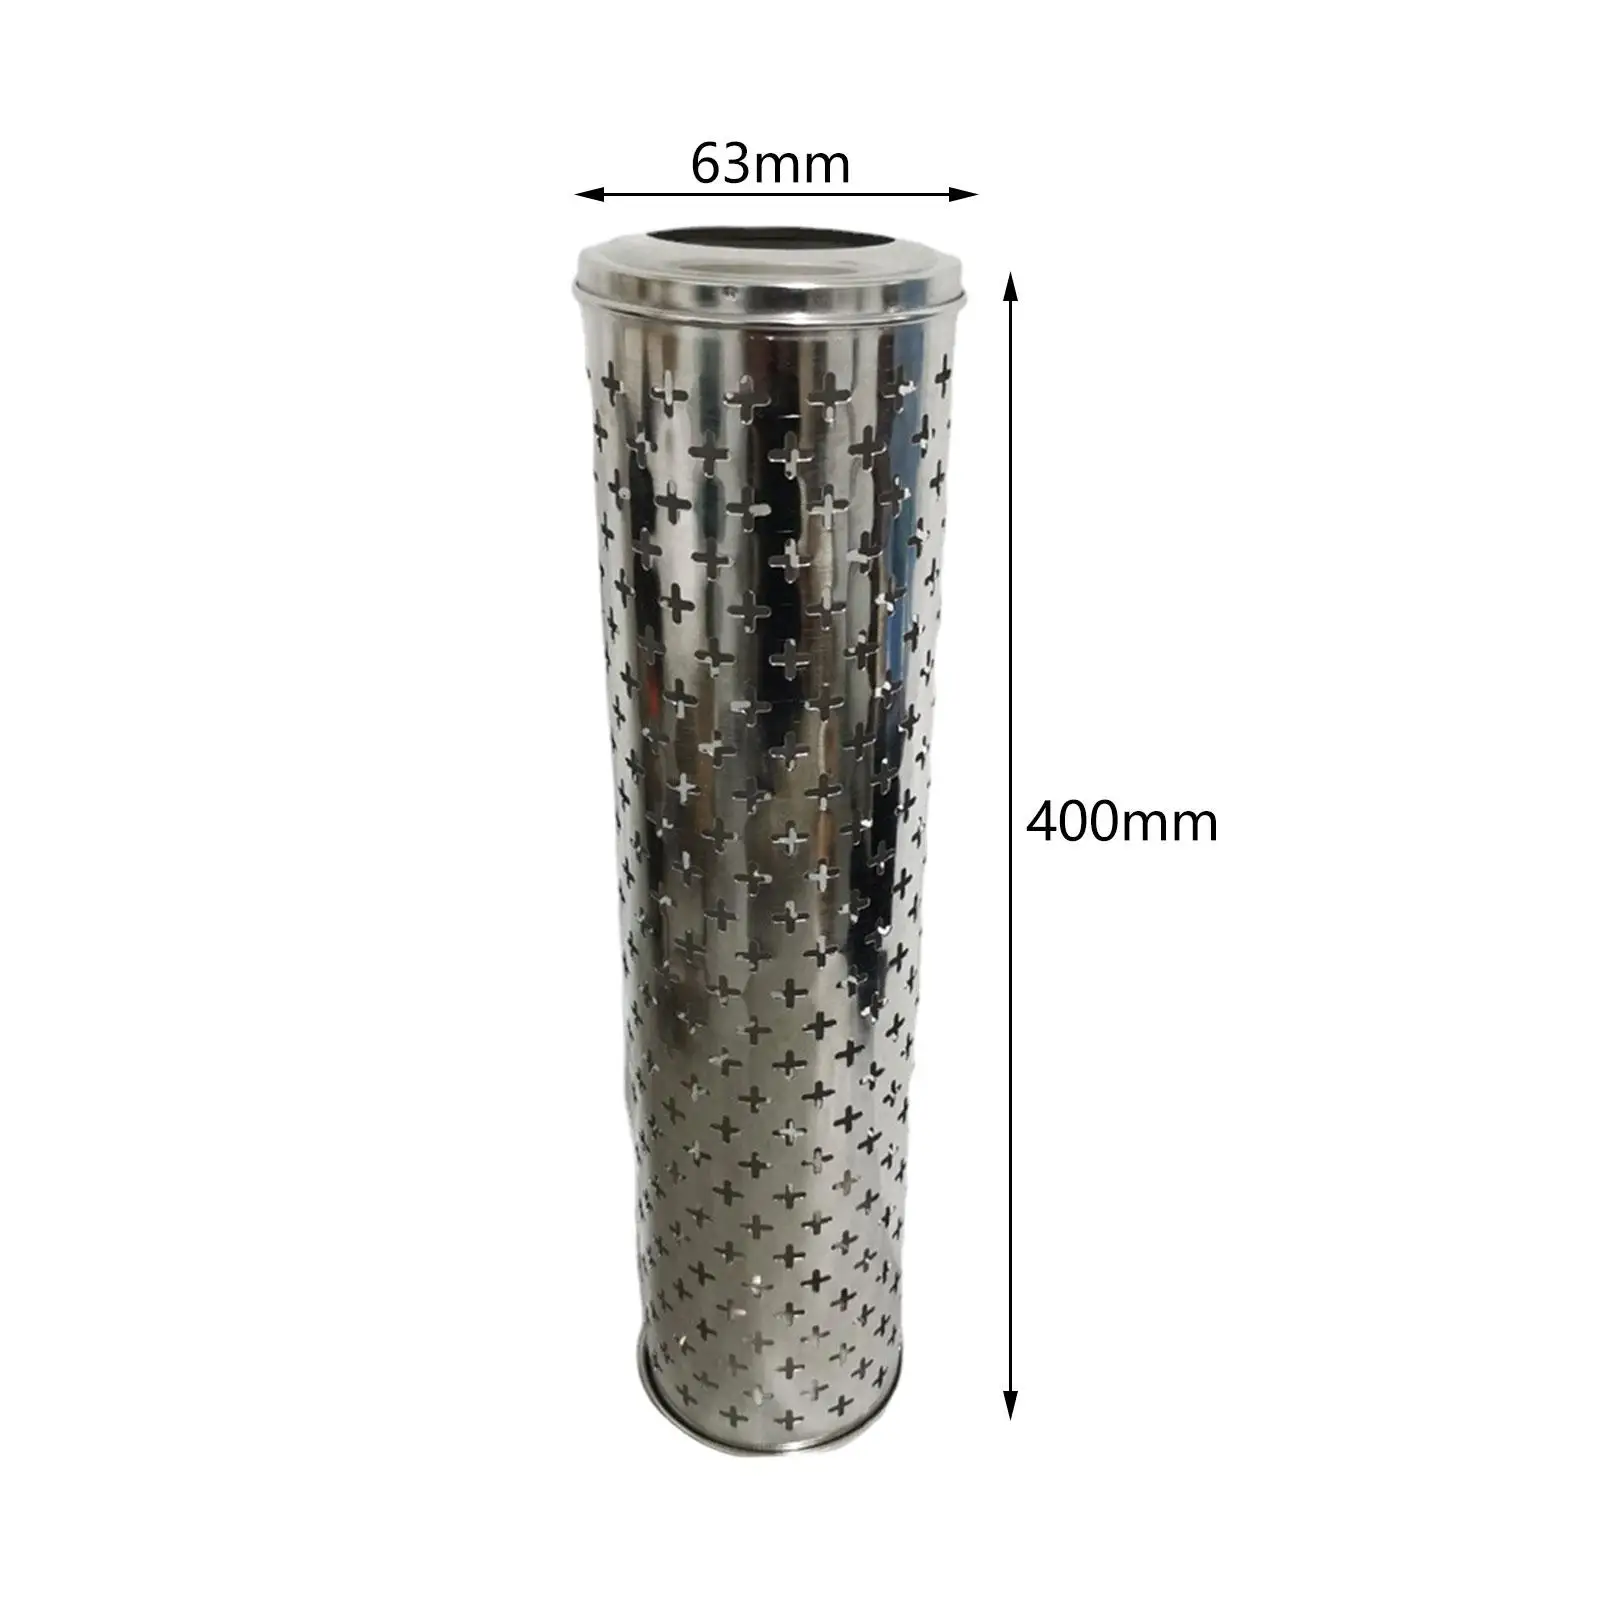 Chimney Burner Furnace Stainless Steel Stove Tube for Outdoor Hiking Camping 